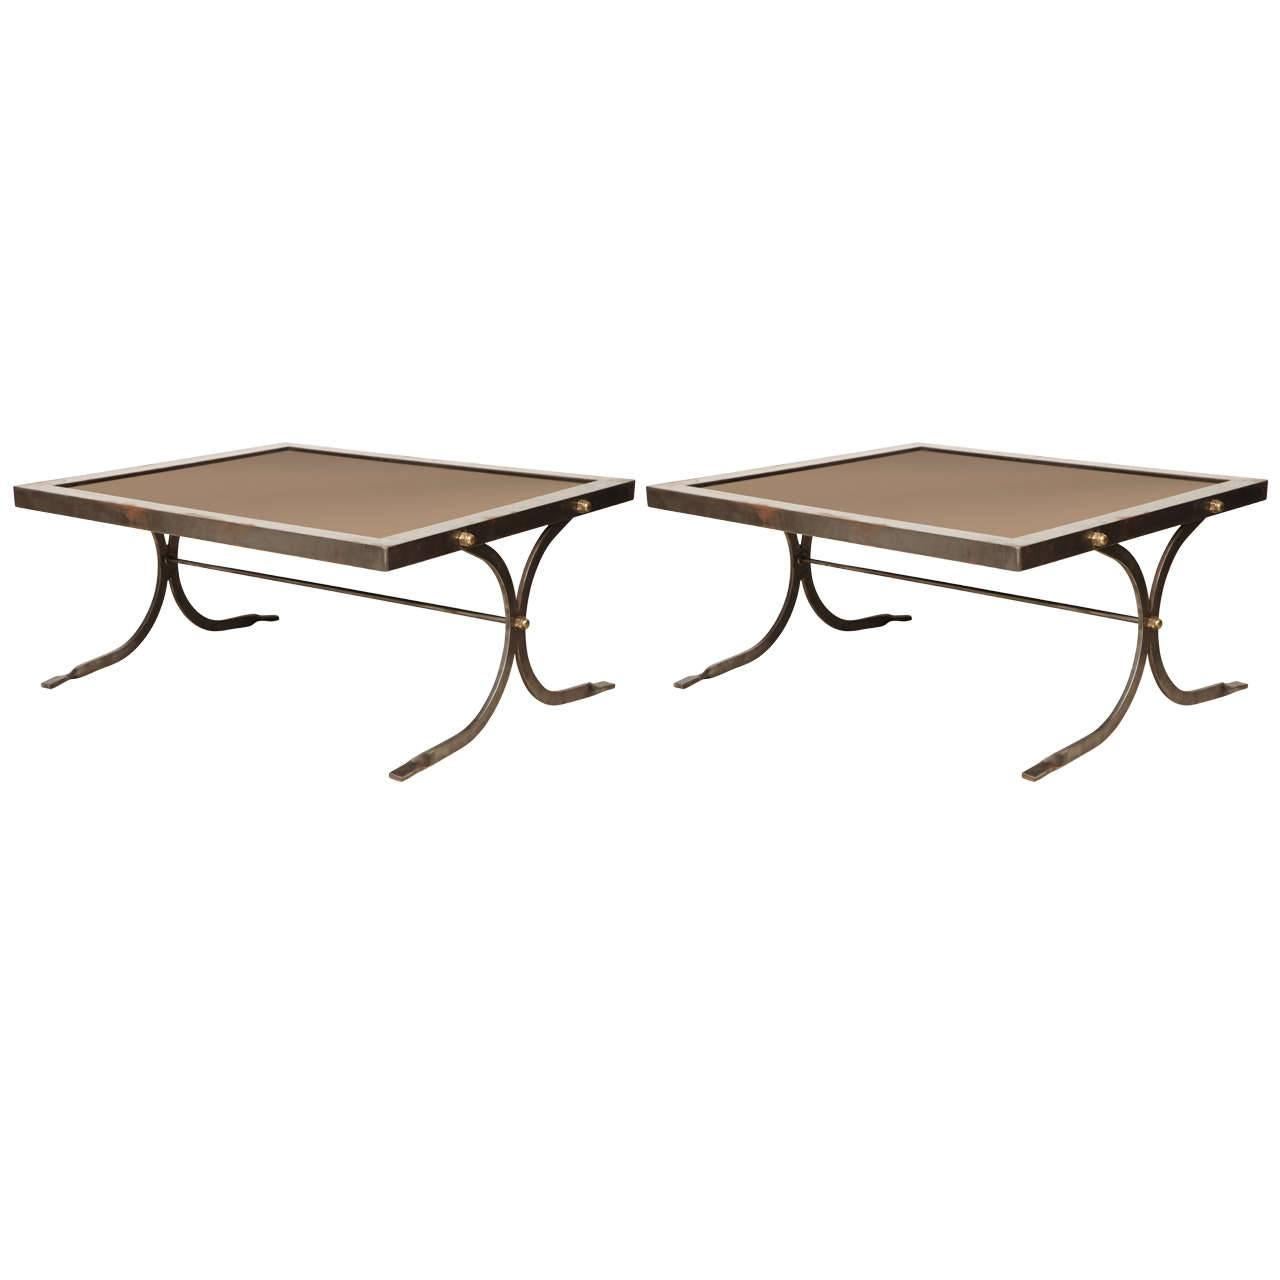 Pair of Maison Jansen Steel Coffee Tables with Smoked Mirrored Tops, France